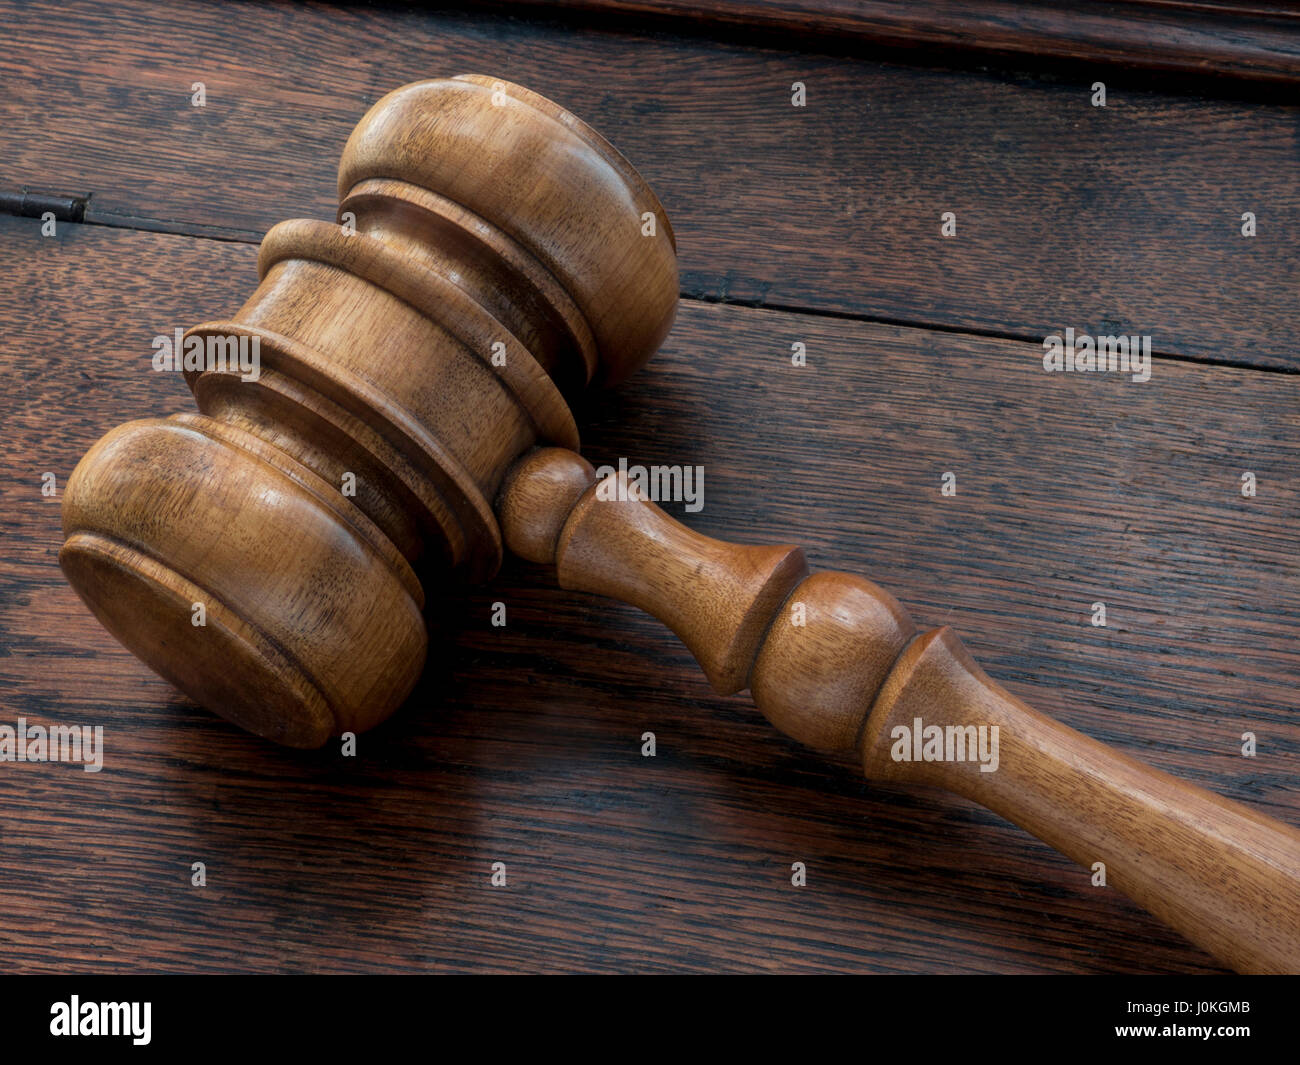 Auctioneer /Judges wooden gavel on old wooden desk top Stock Photo